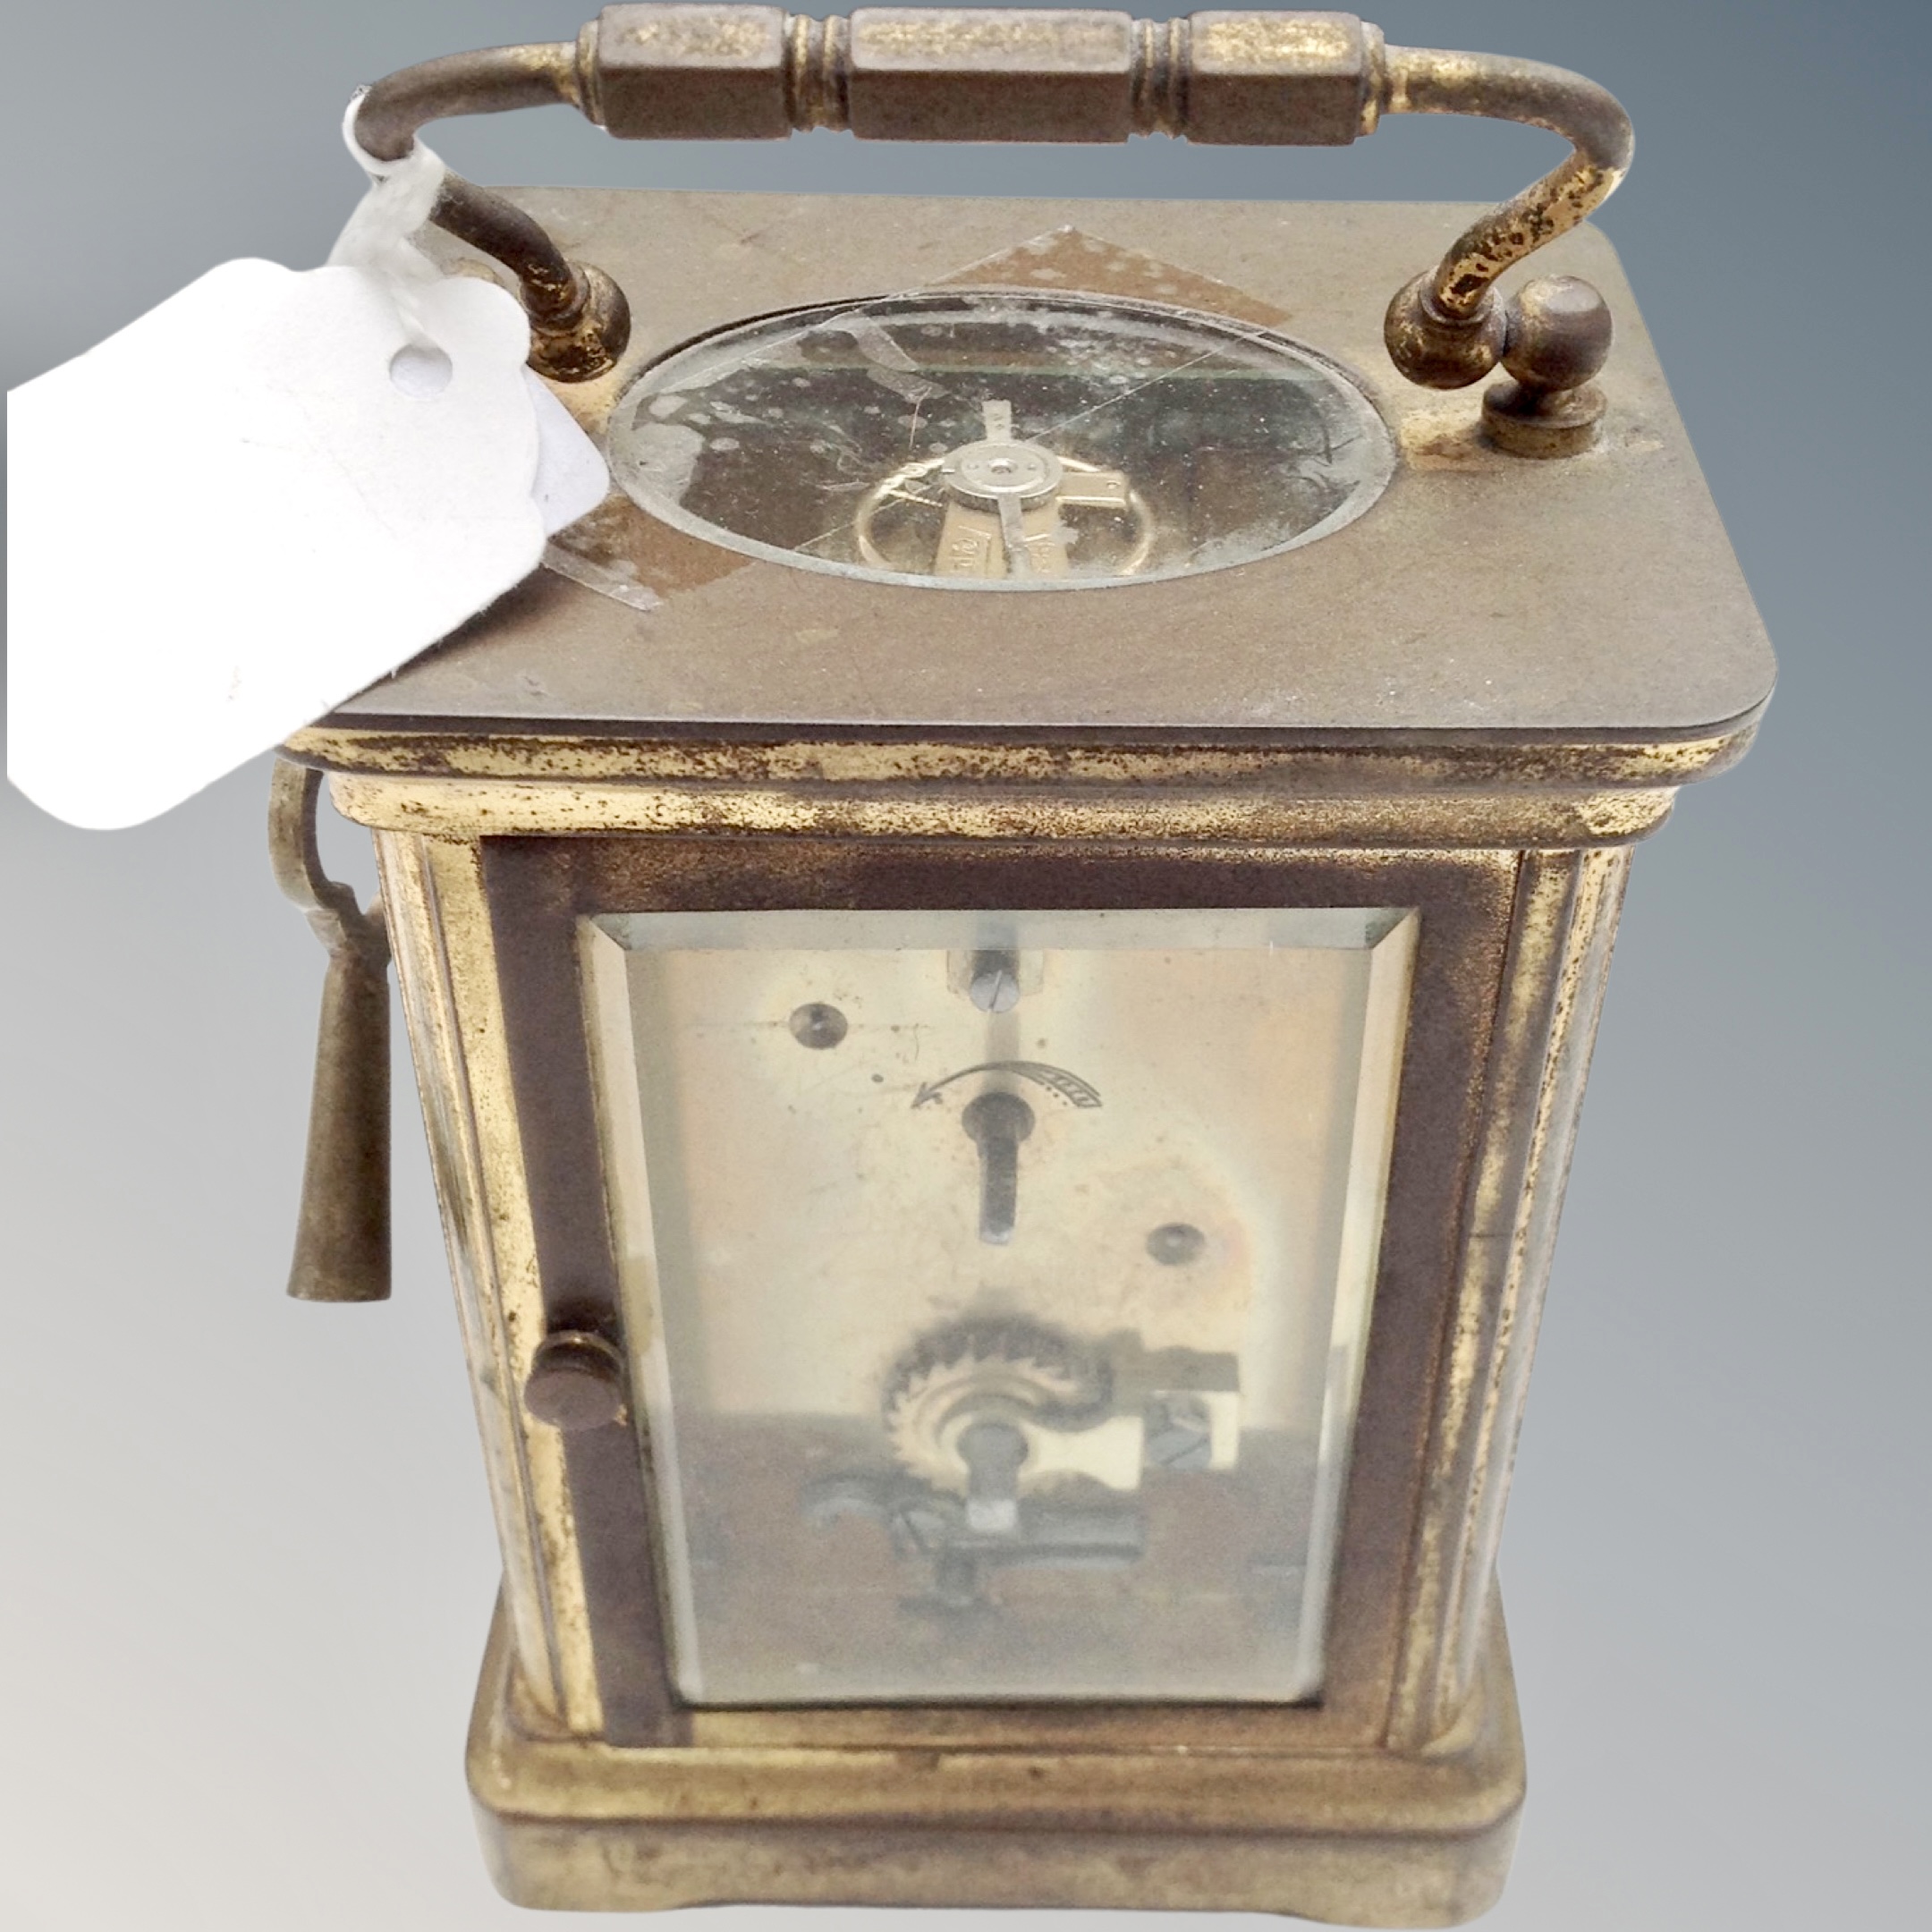 A brass cased carriage timepiece with platform escapement and key. - Image 2 of 2